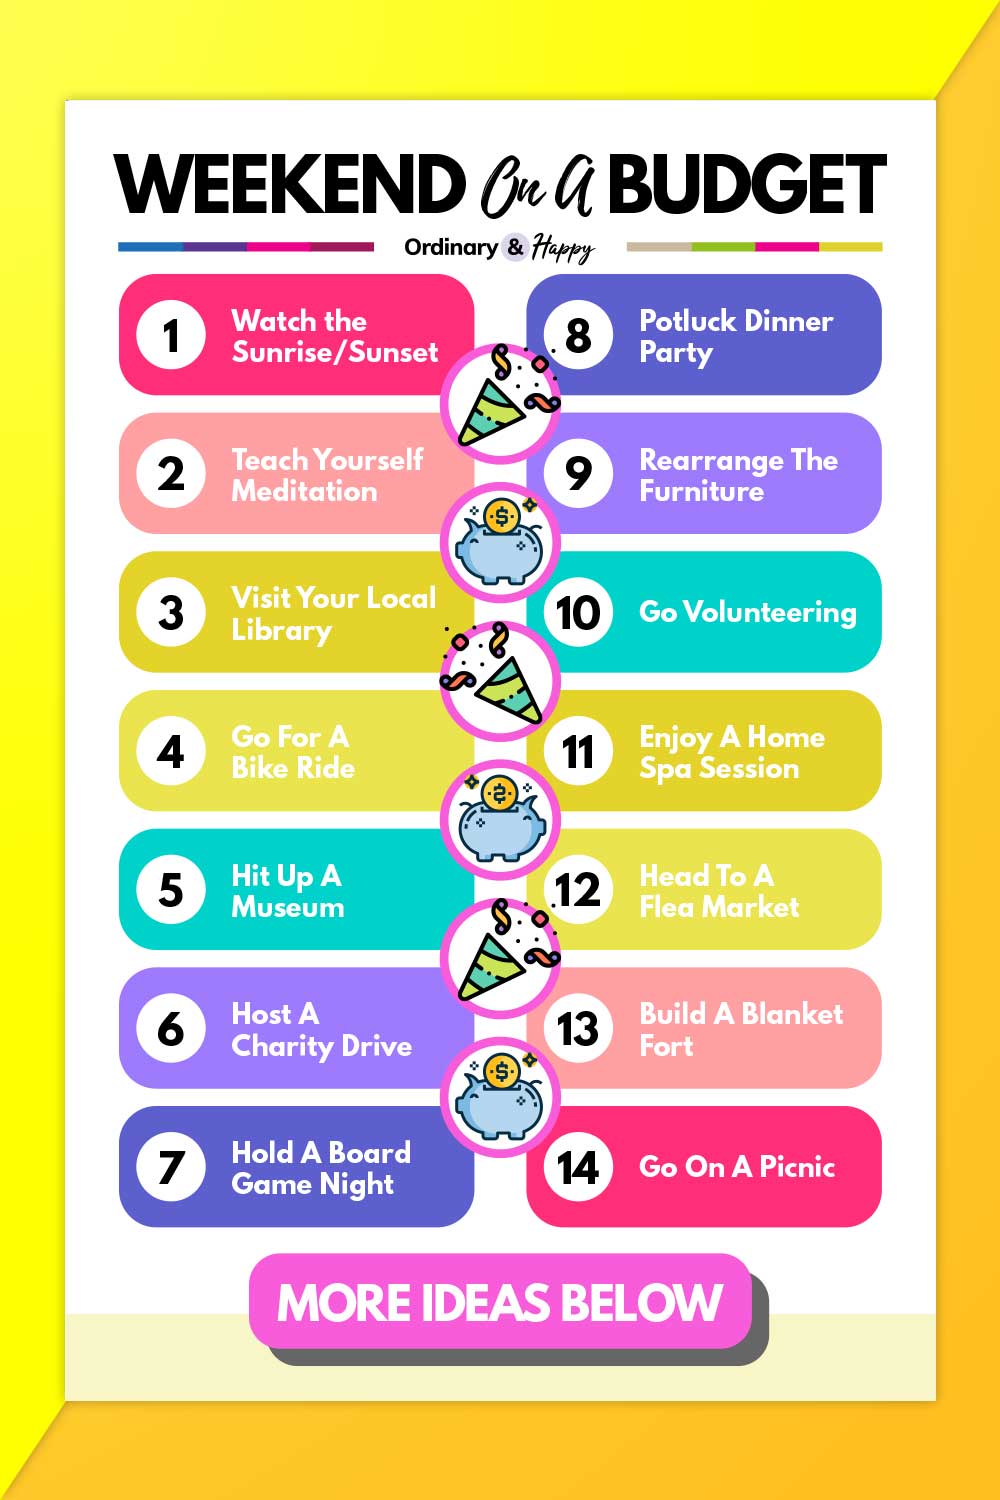 20 Fun Things To Do on the Weekend on a Budget (Cheap or Free